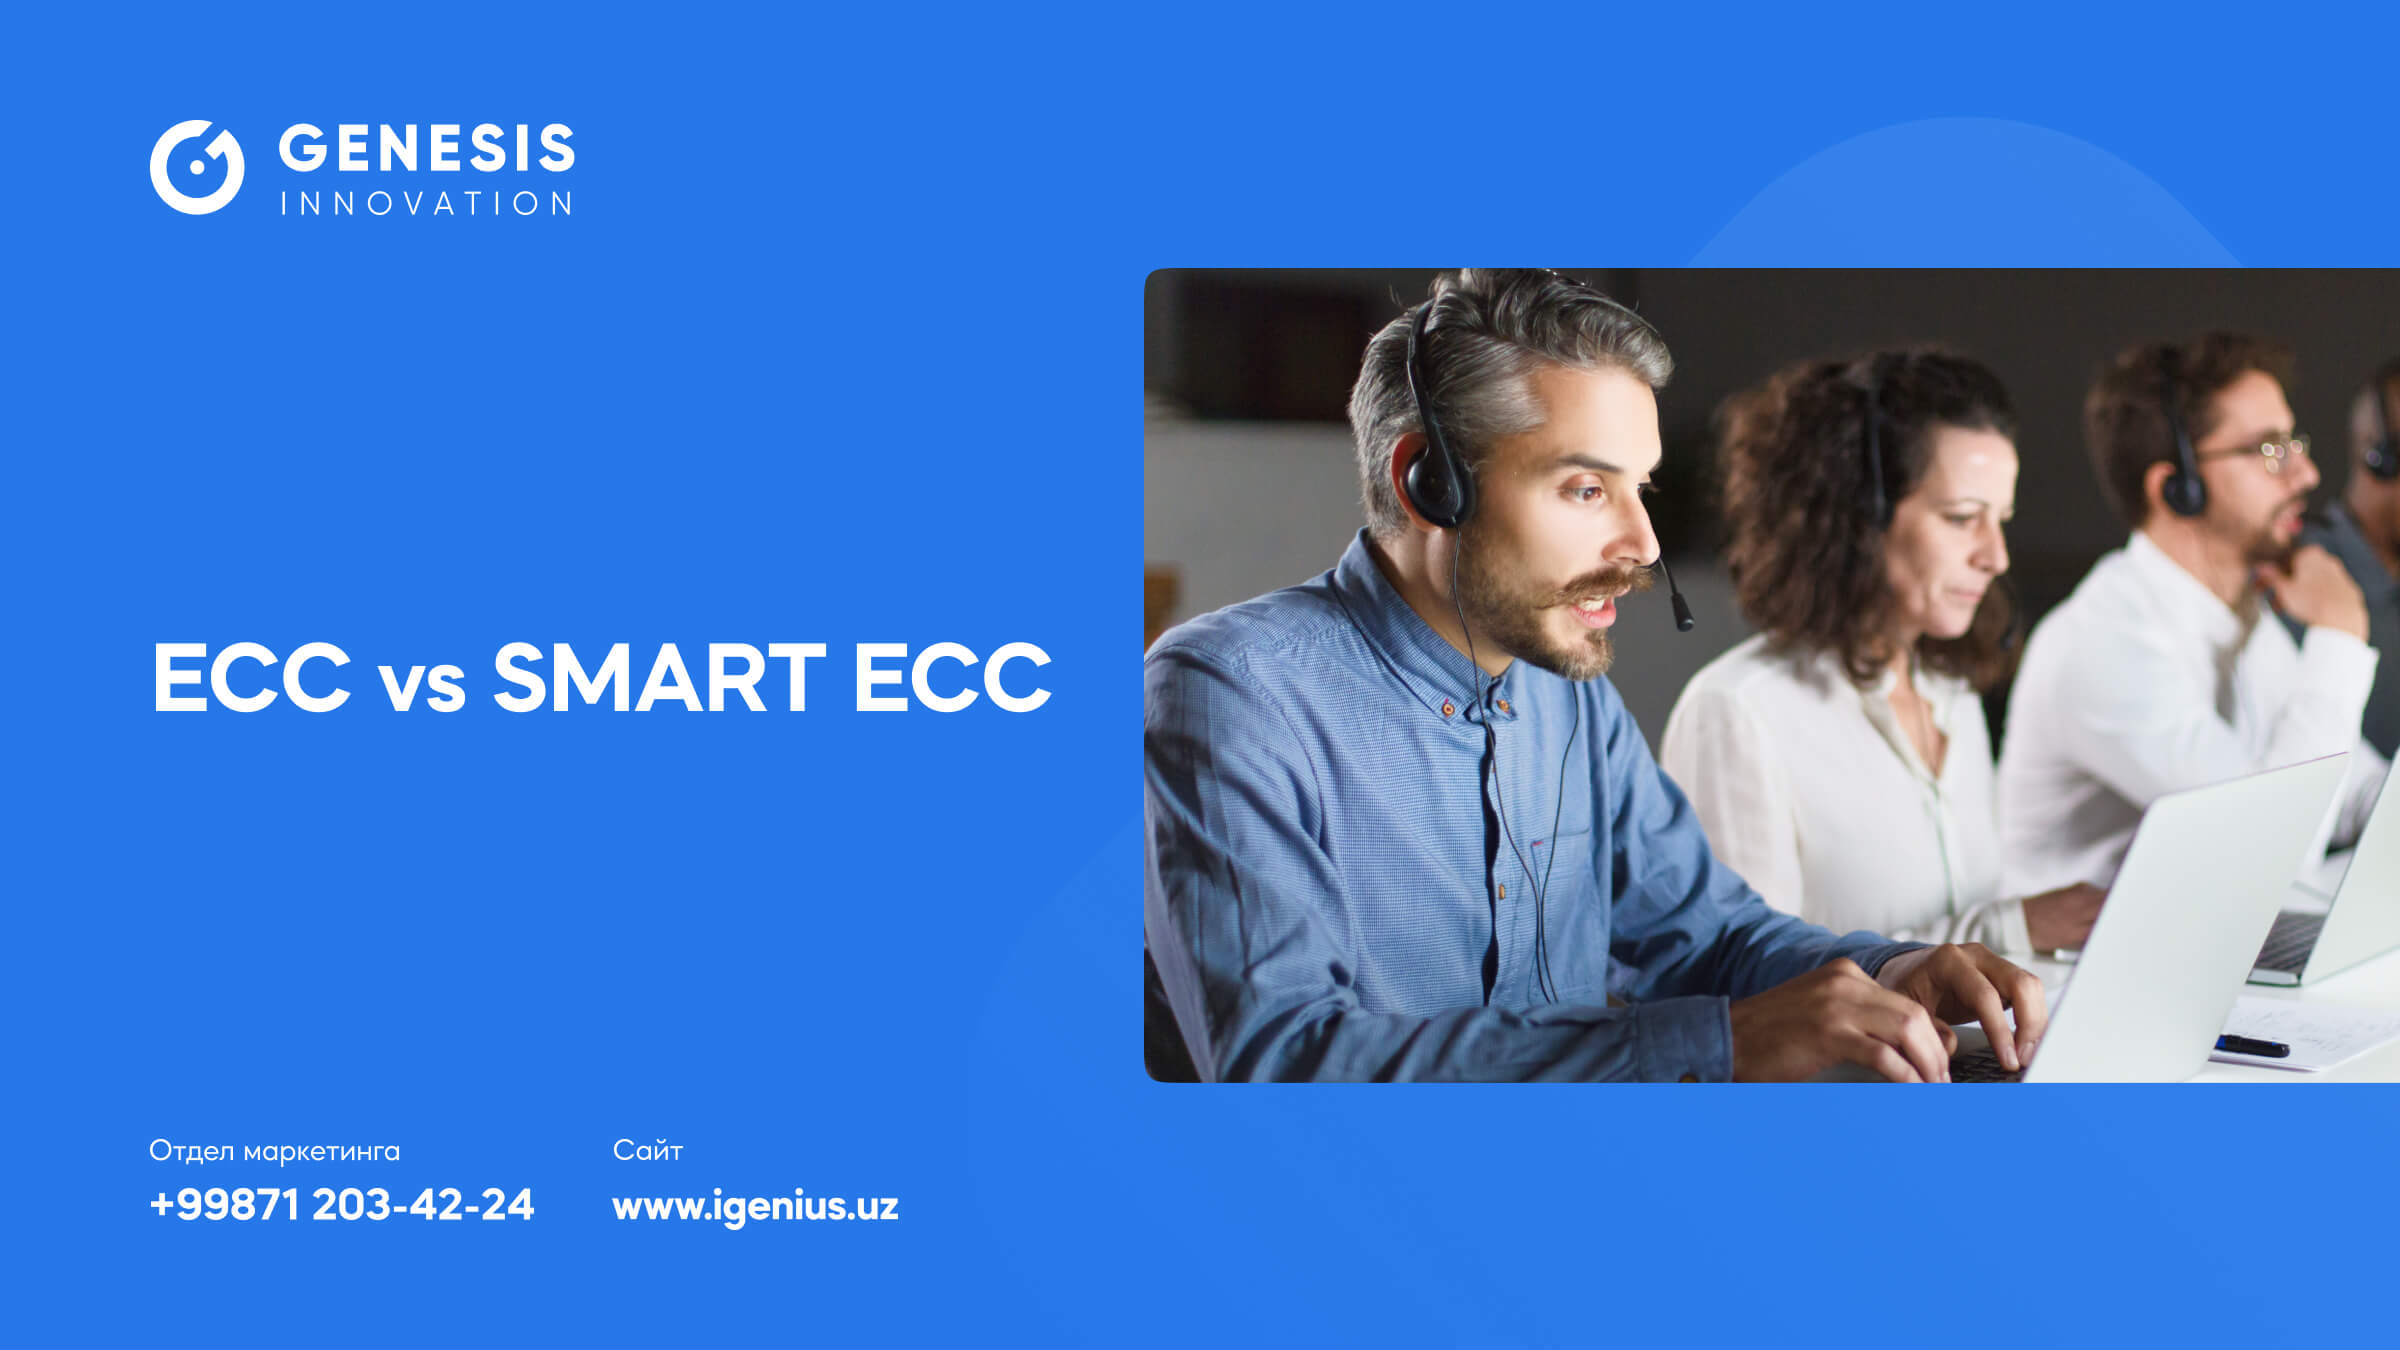 What is the difference between ECC and SMART ECC?